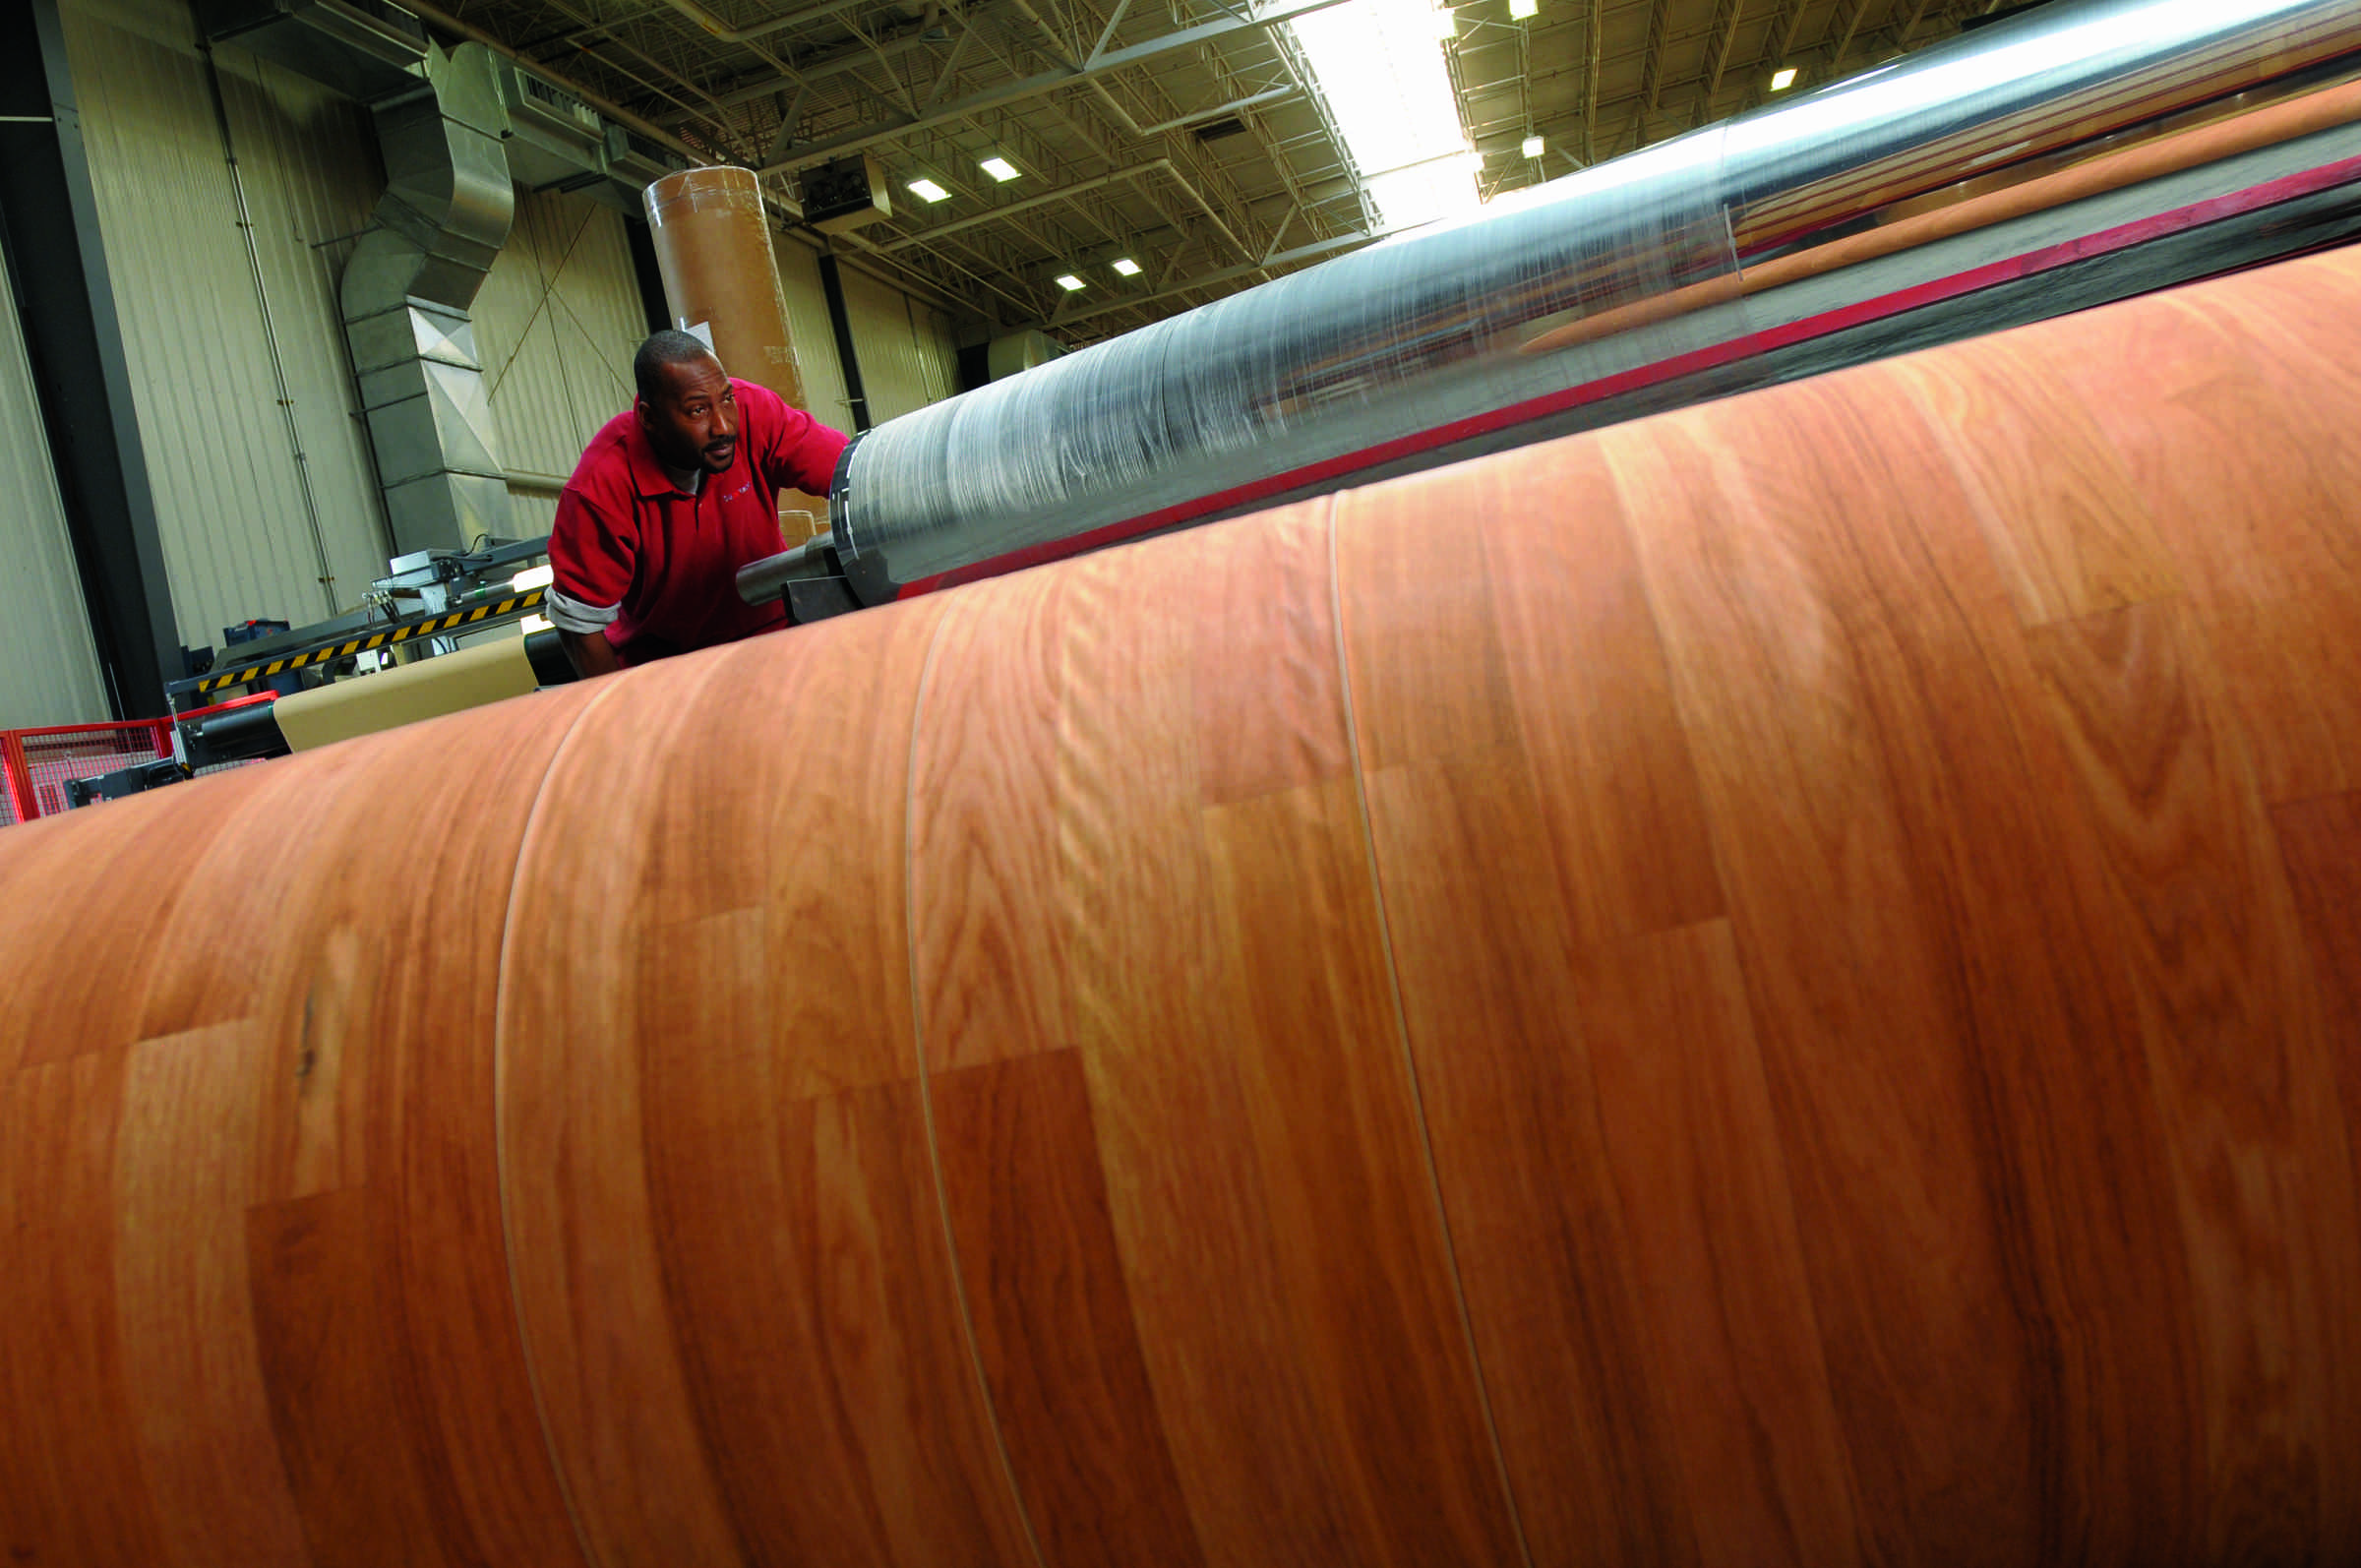 Laminate Flooring rolls out at Suddekor's Agawam, Mass. location.